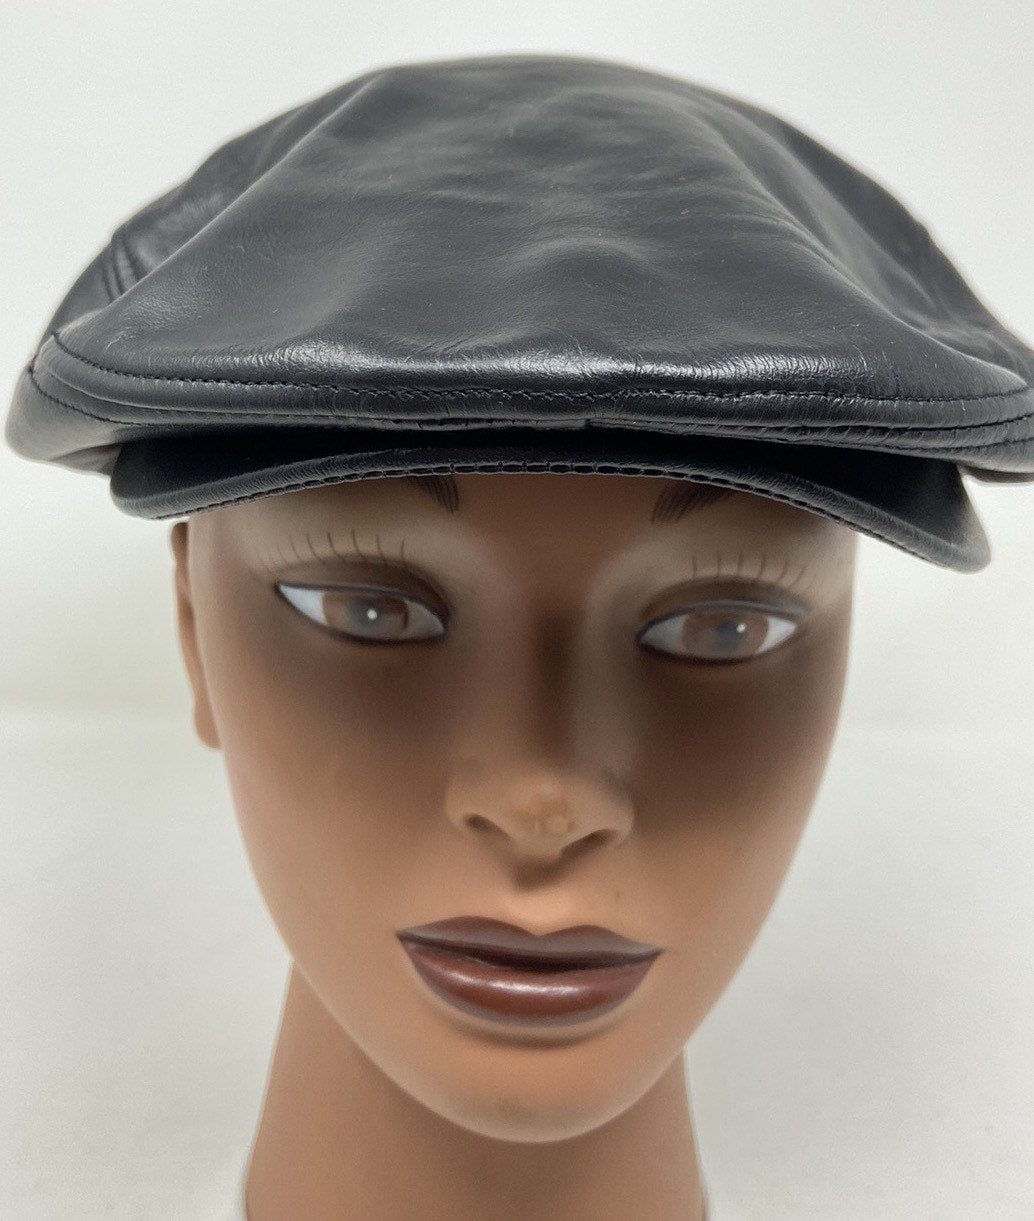 Leather Cap,Winner Leather cap,leather Cabbie hat,cabbie hat,made in USA,newsboy Leather hat,newsboy Hat, Vintage,Vintage Hat